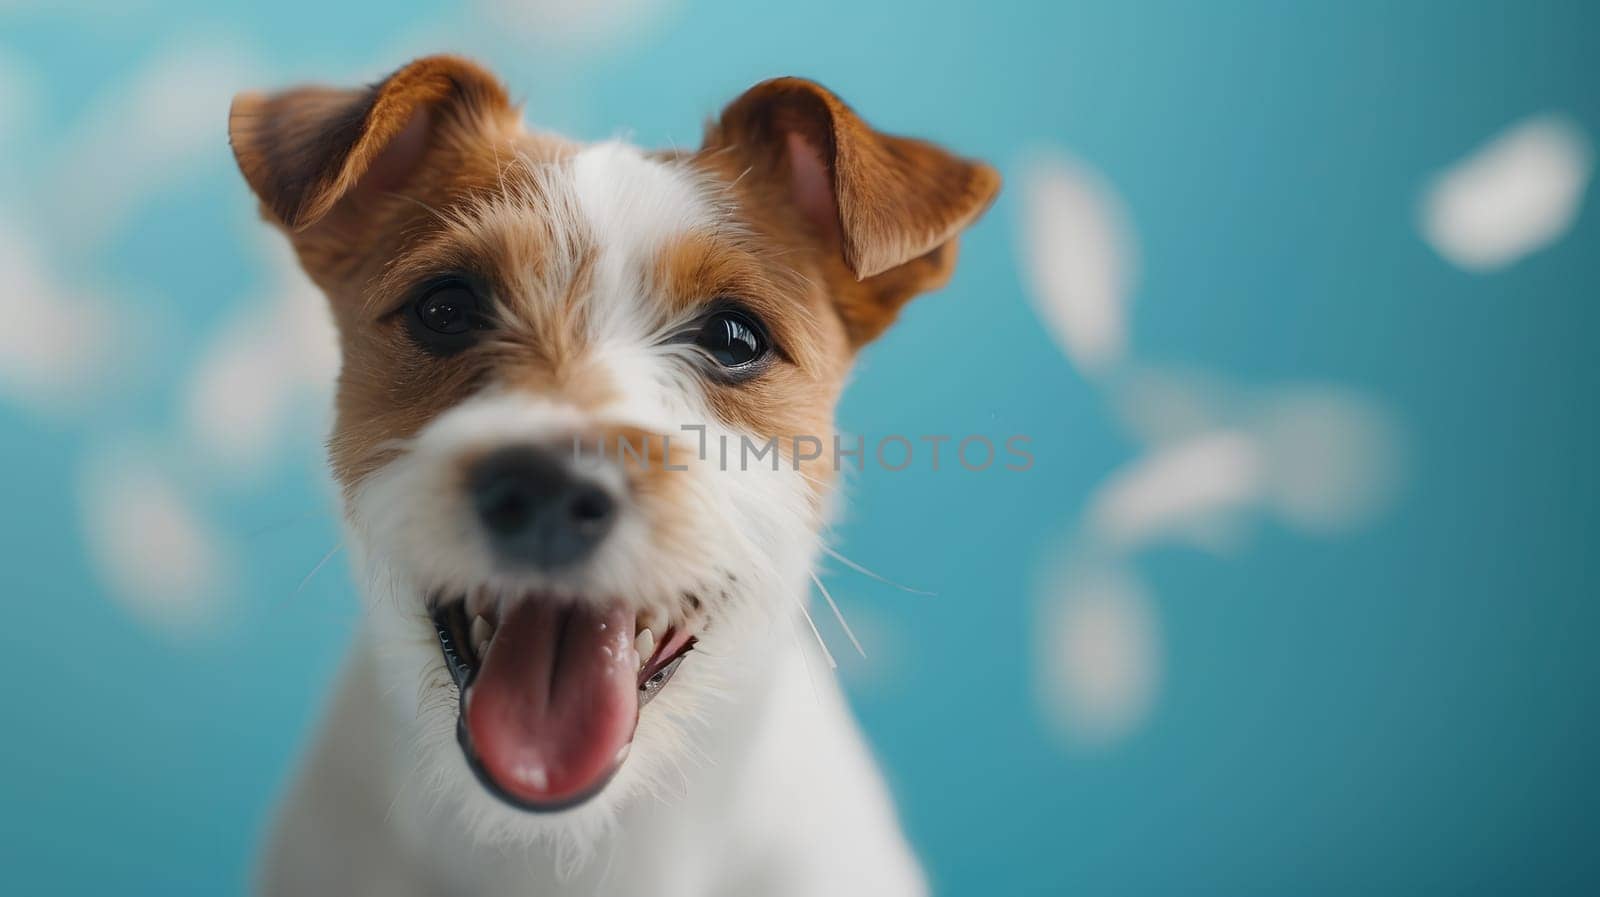 A Terrier, specifically an Irish Jacks, a carnivorous working animal and companion dog breed, is on a blue background, with its whiskers and collar visible, sitting with its tongue out